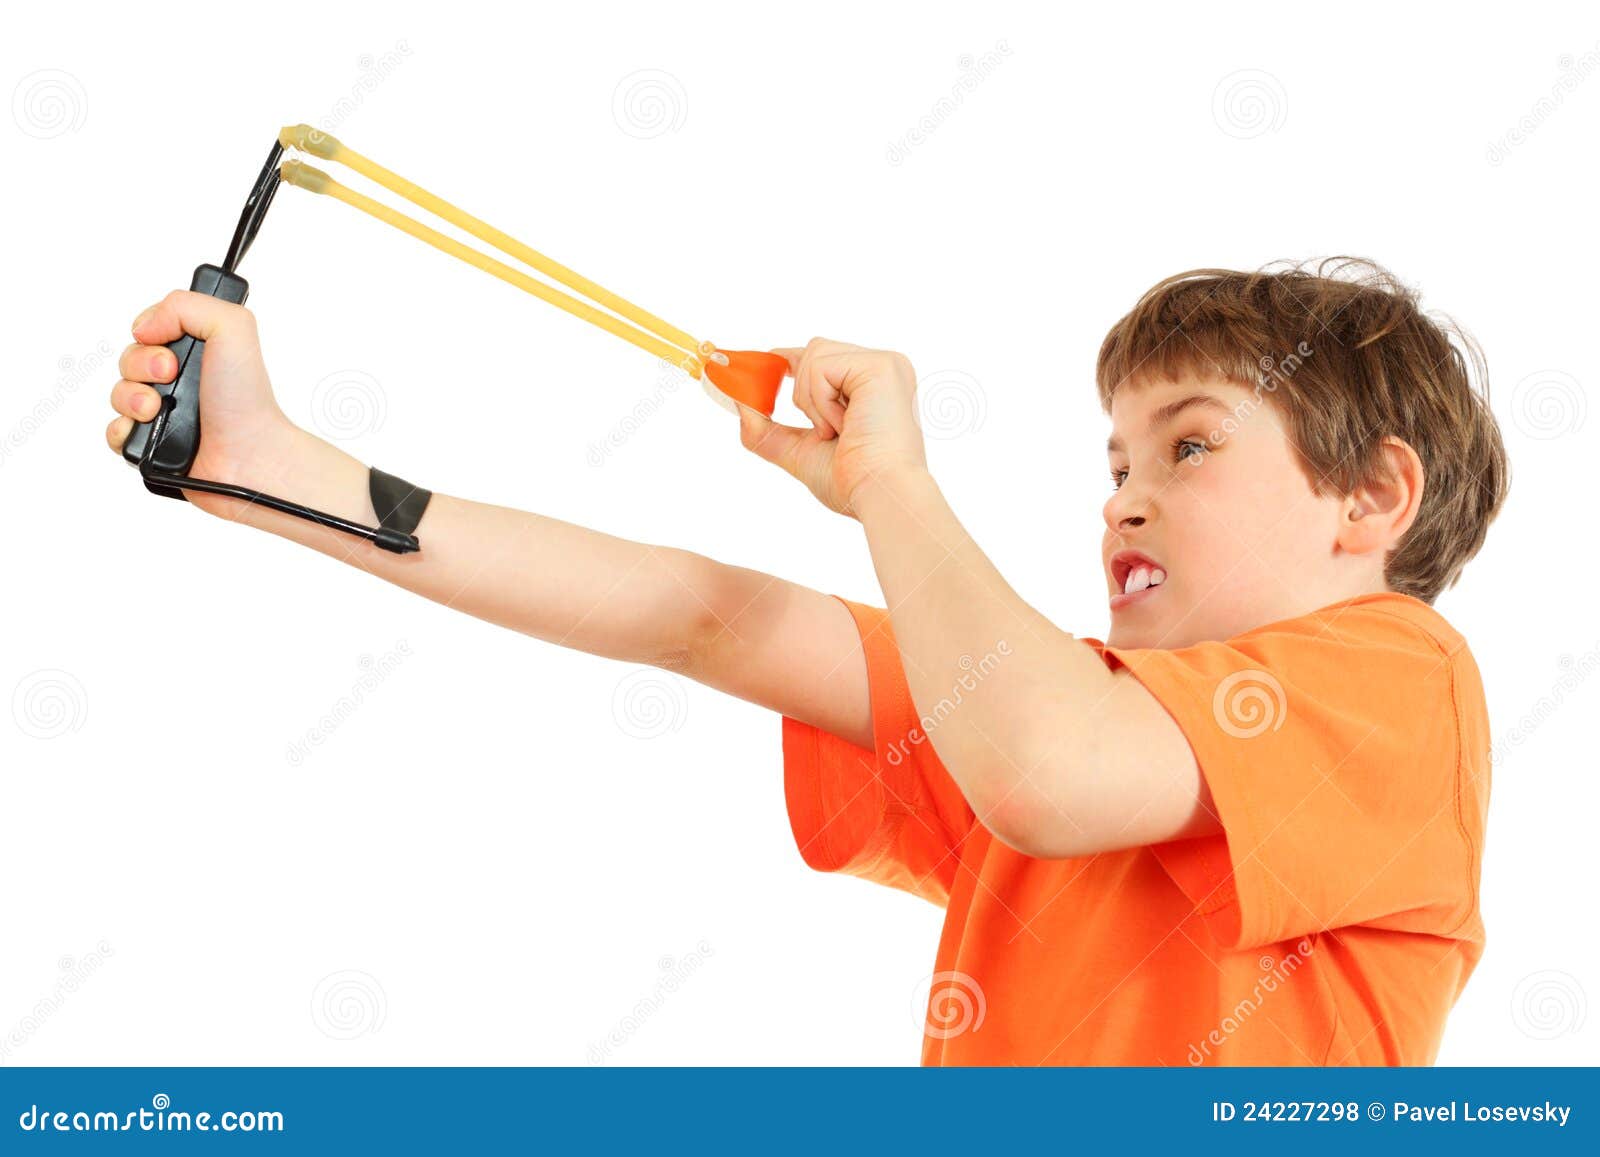 concentrated boy with slingshot aim